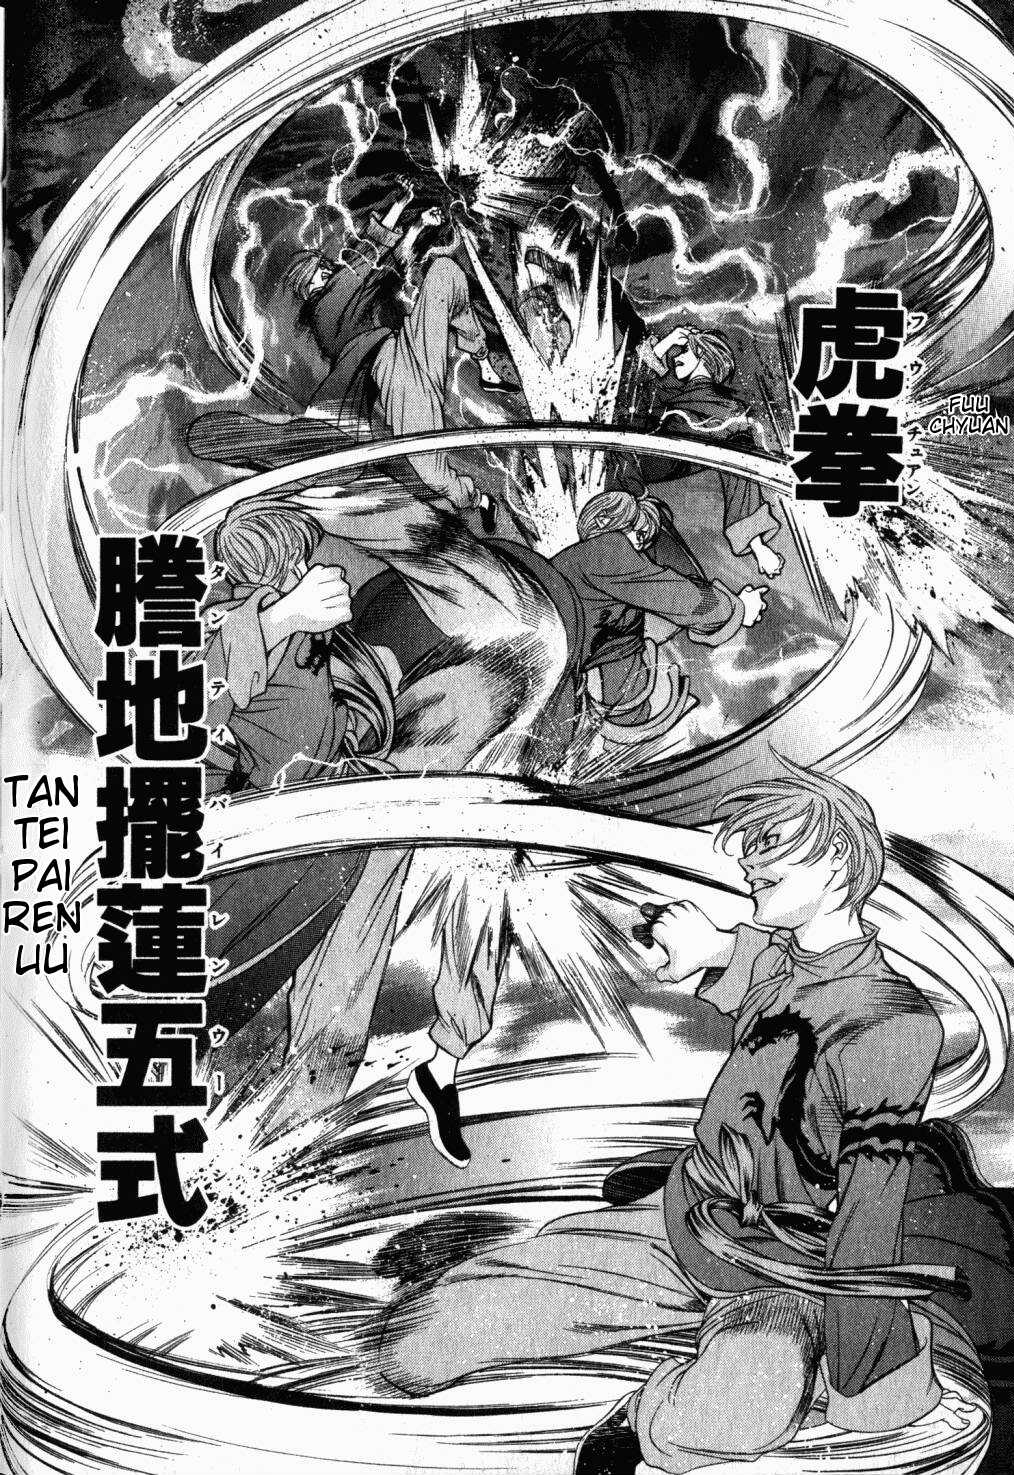 The Dragon Fist is Over powered (Tenjou tenge)